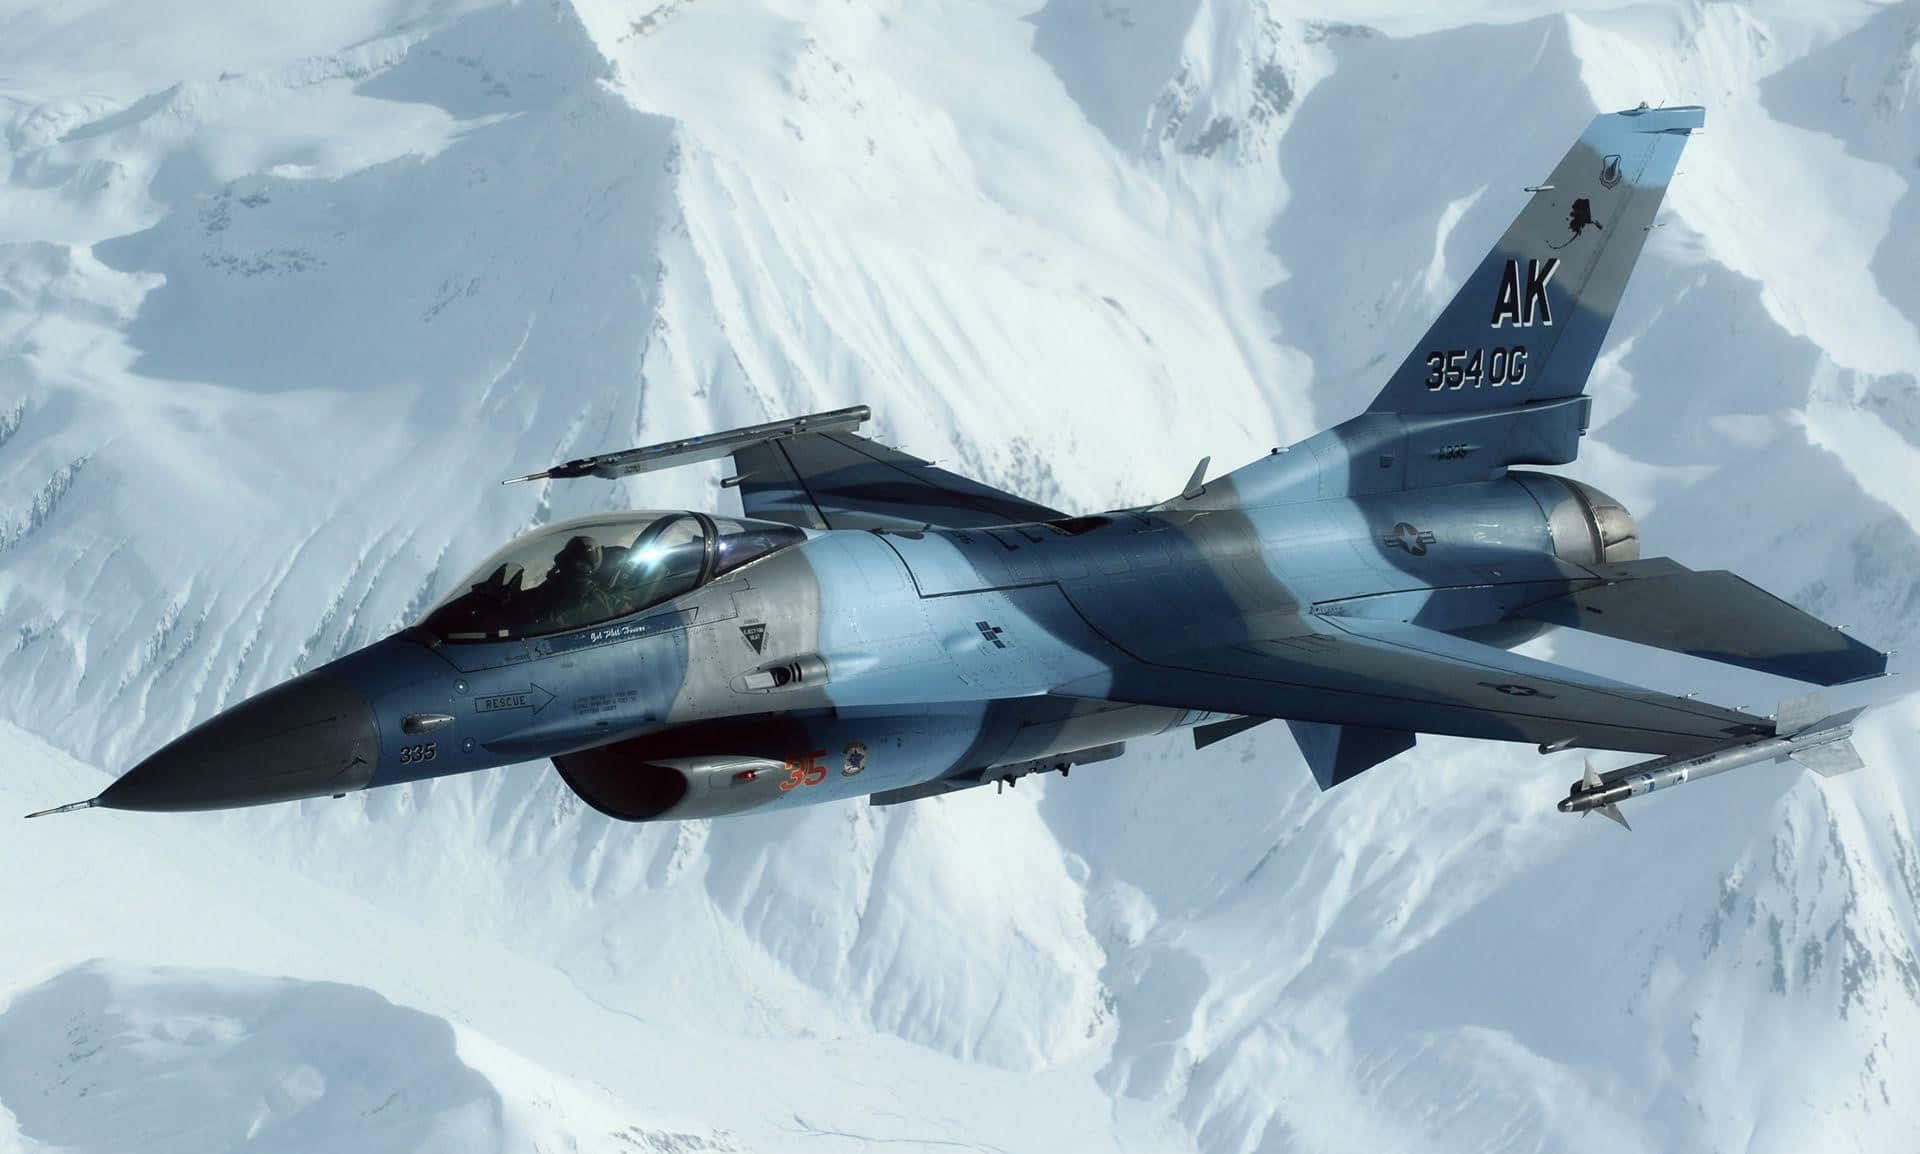 F16 Fighting Falcon Over Snowy Mountains Wallpaper